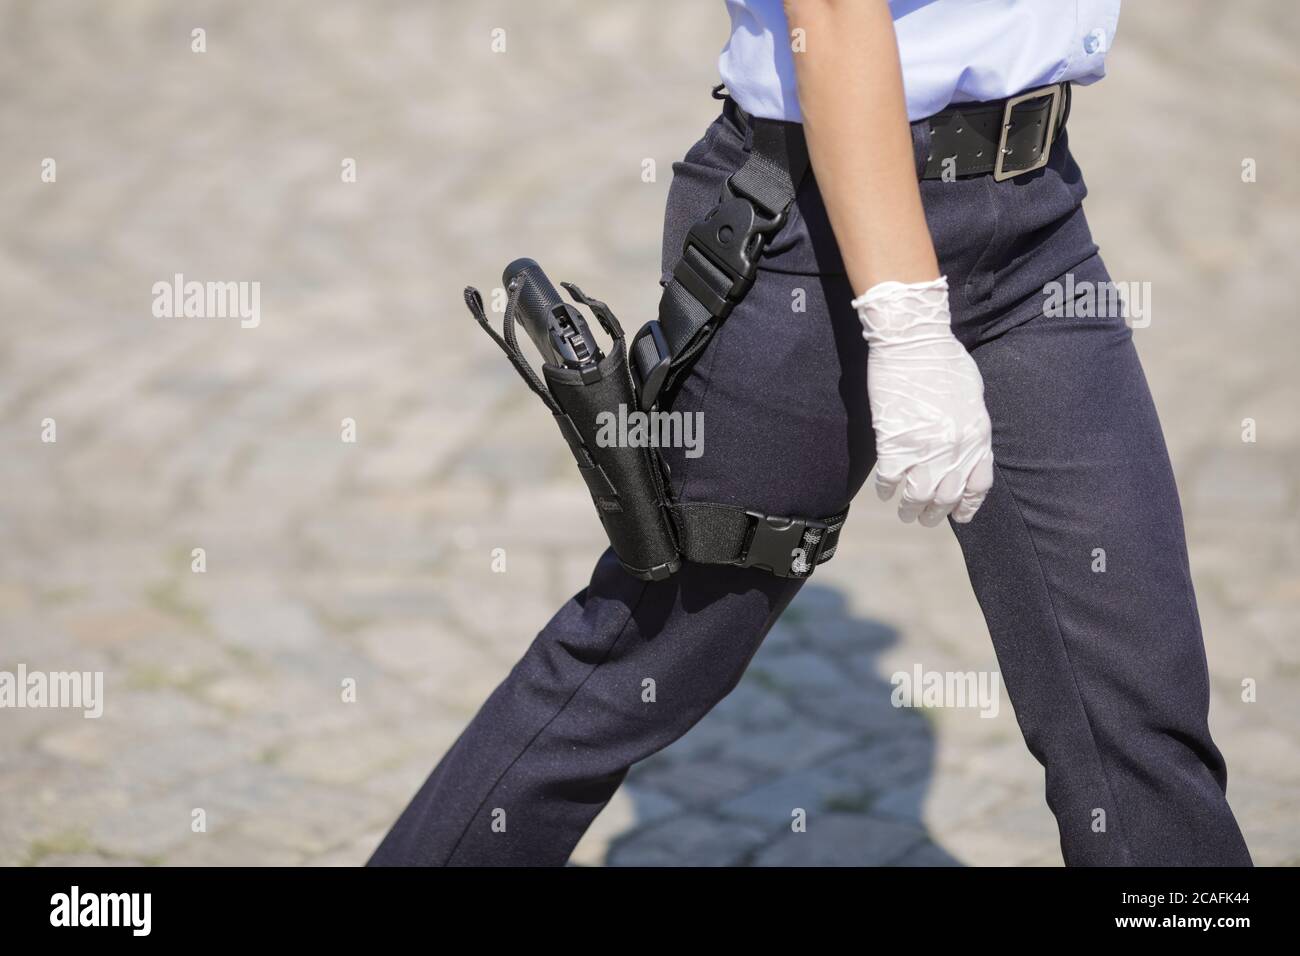 Bucharest, Romania - July 29, 2020: Details with a brand new Beretta PX4 gun in the holster of a Romanian female police officer during an event of the Stock Photo